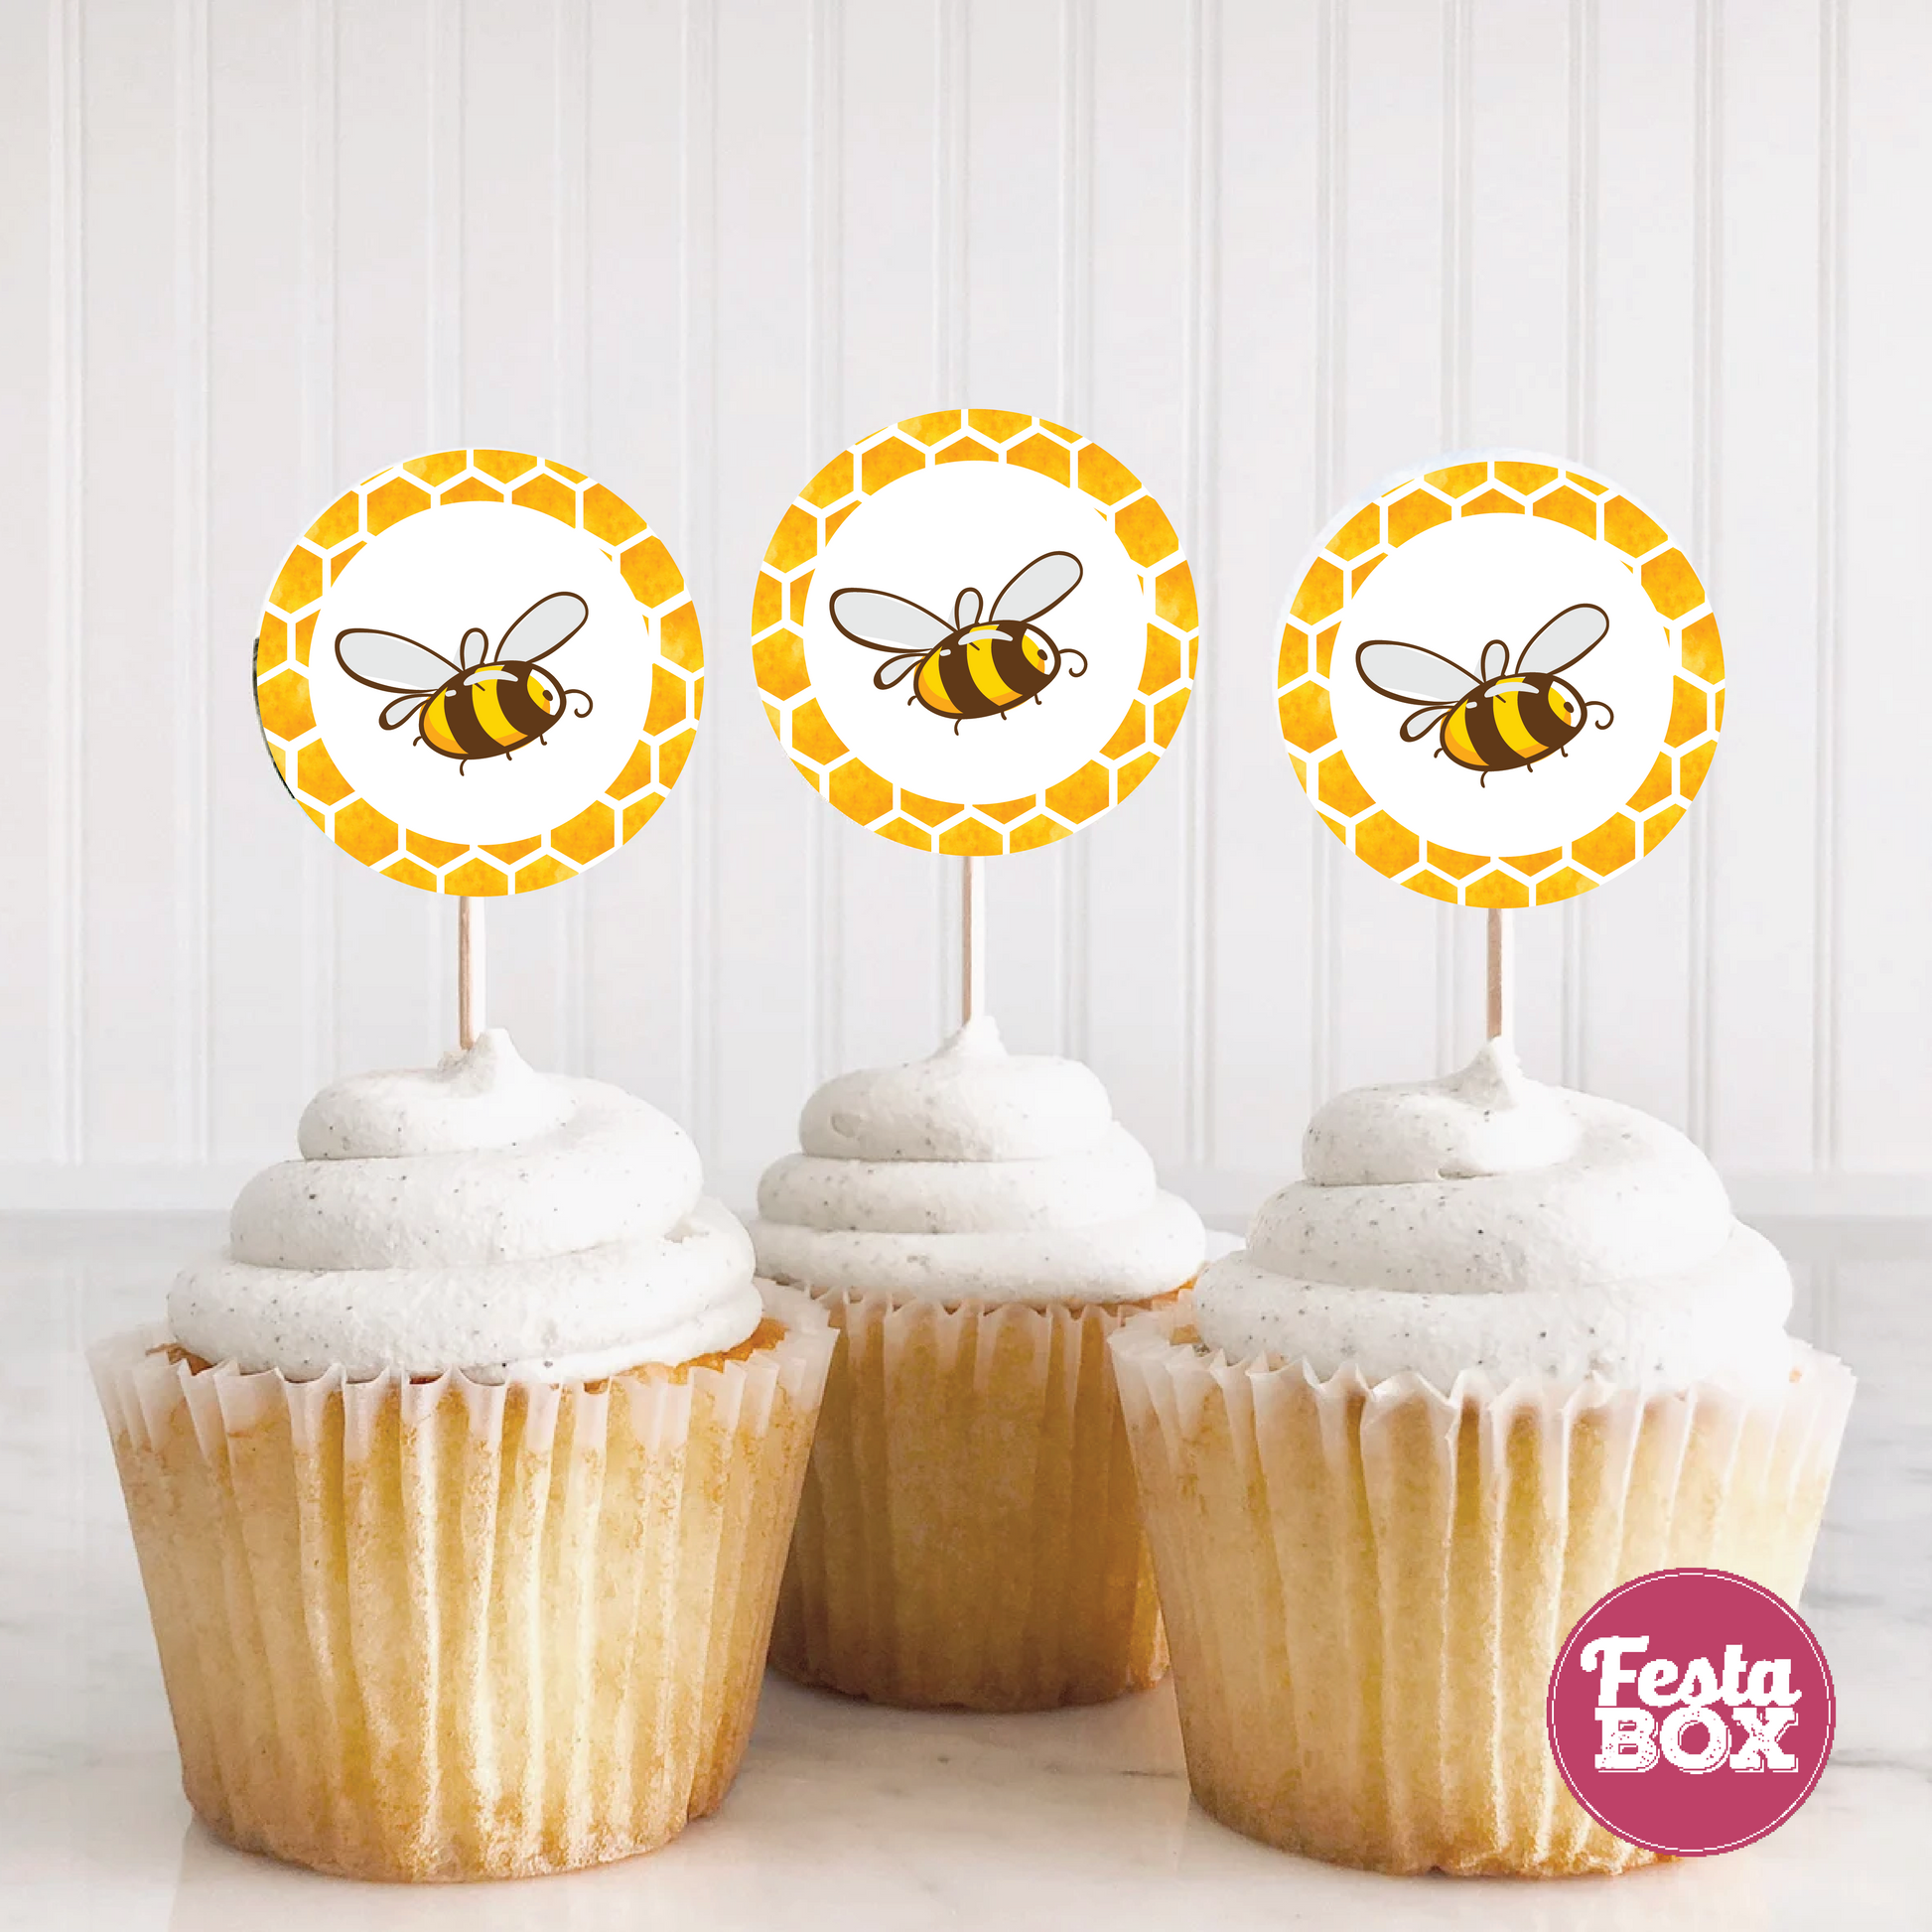 Cupcake Toppers for Baby Shower - Honeybee Collection by Festabox-Option 2